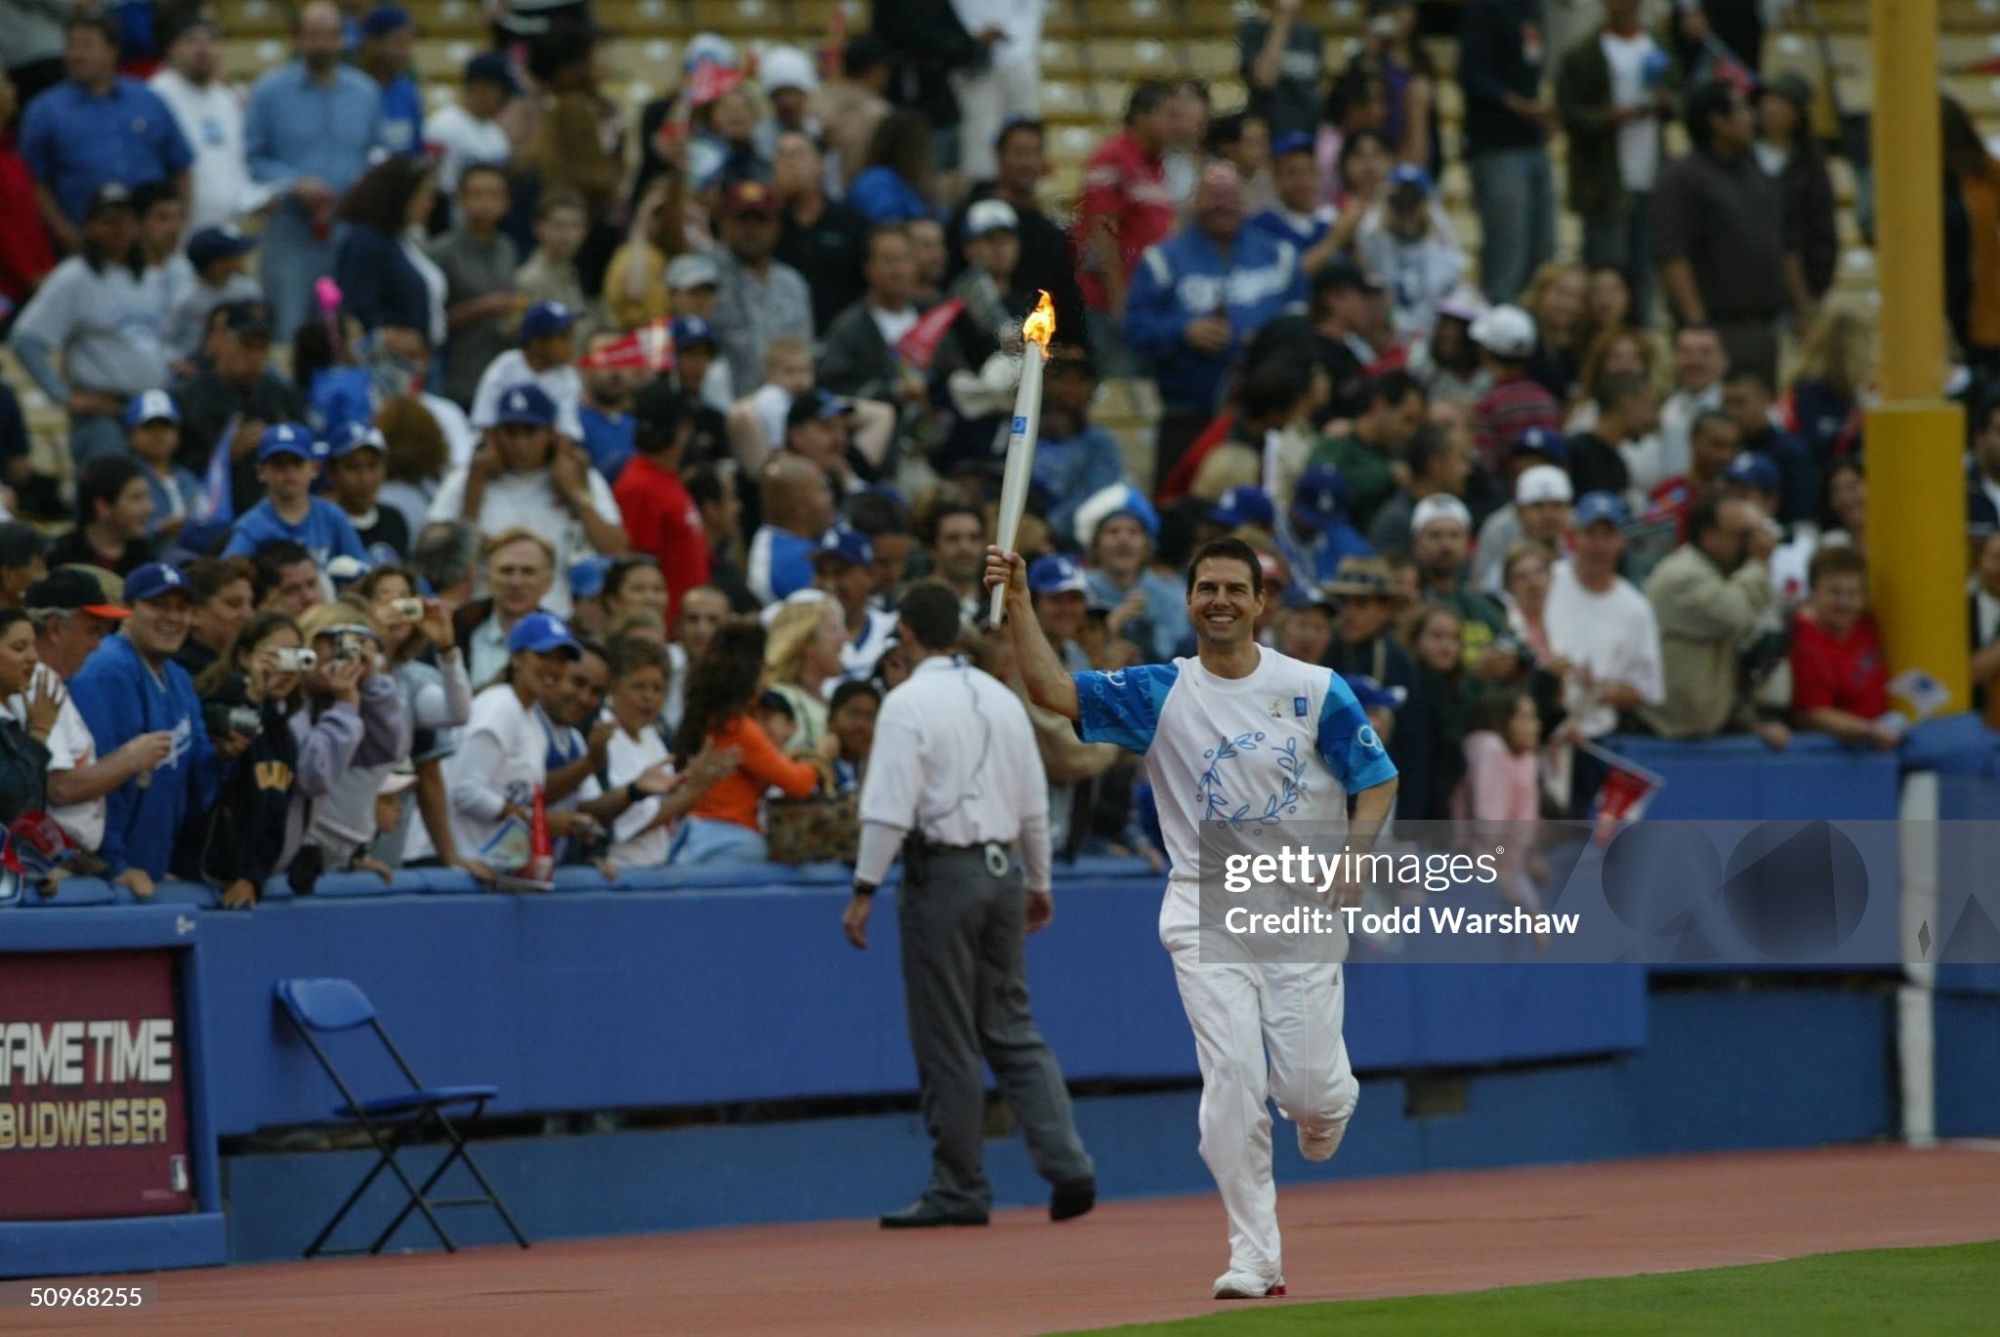 gettyimages-50968255-2048x2048.jpg